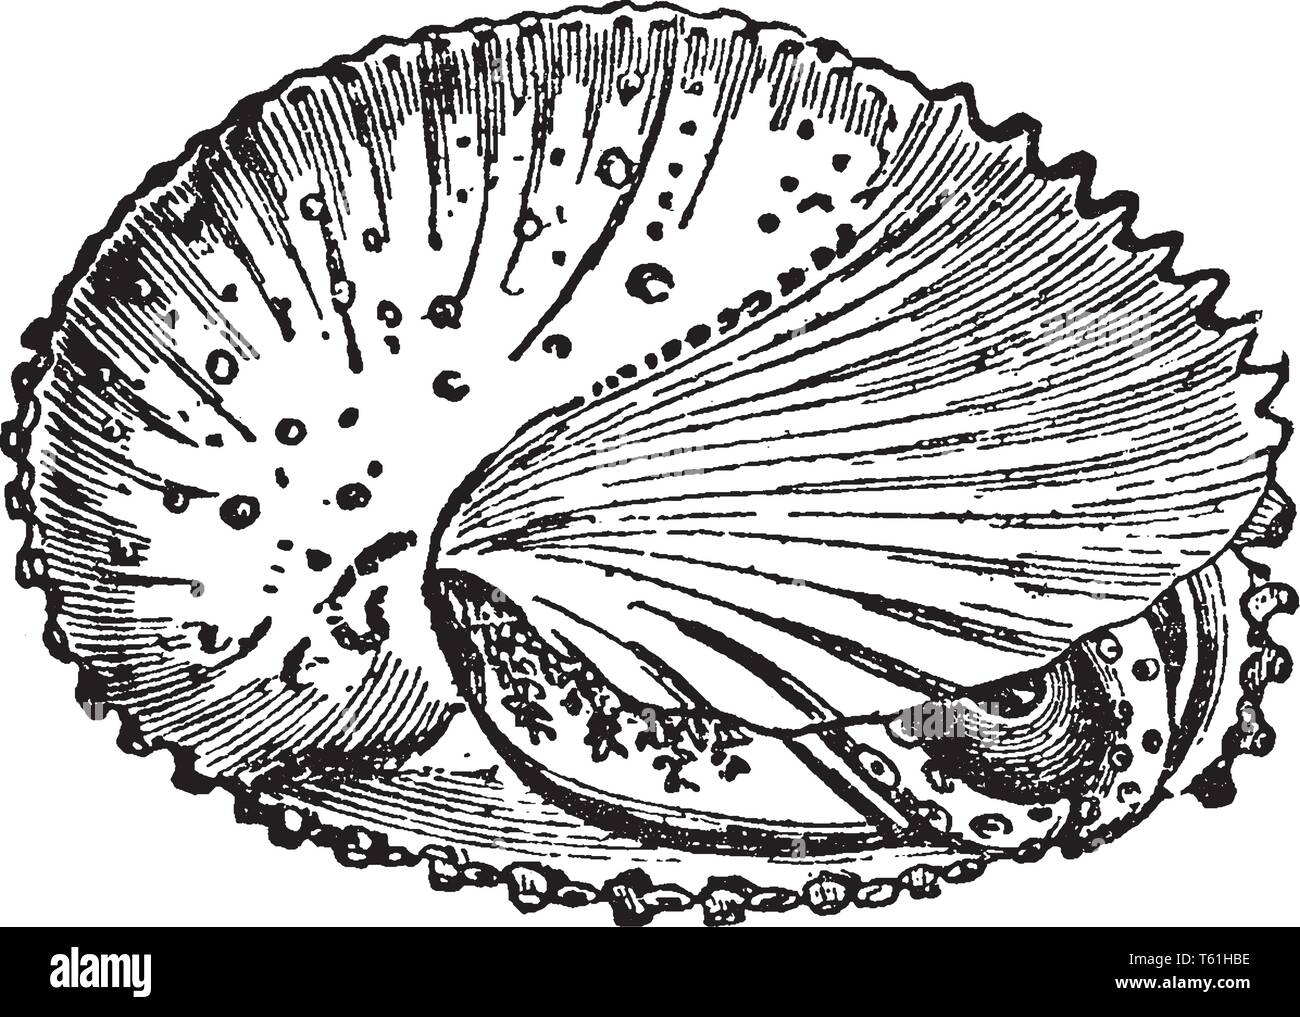 Mollusca is any member of the large phylum Mollusca of invertebrate animals, vintage line drawing or engraving illustration. Stock Vector